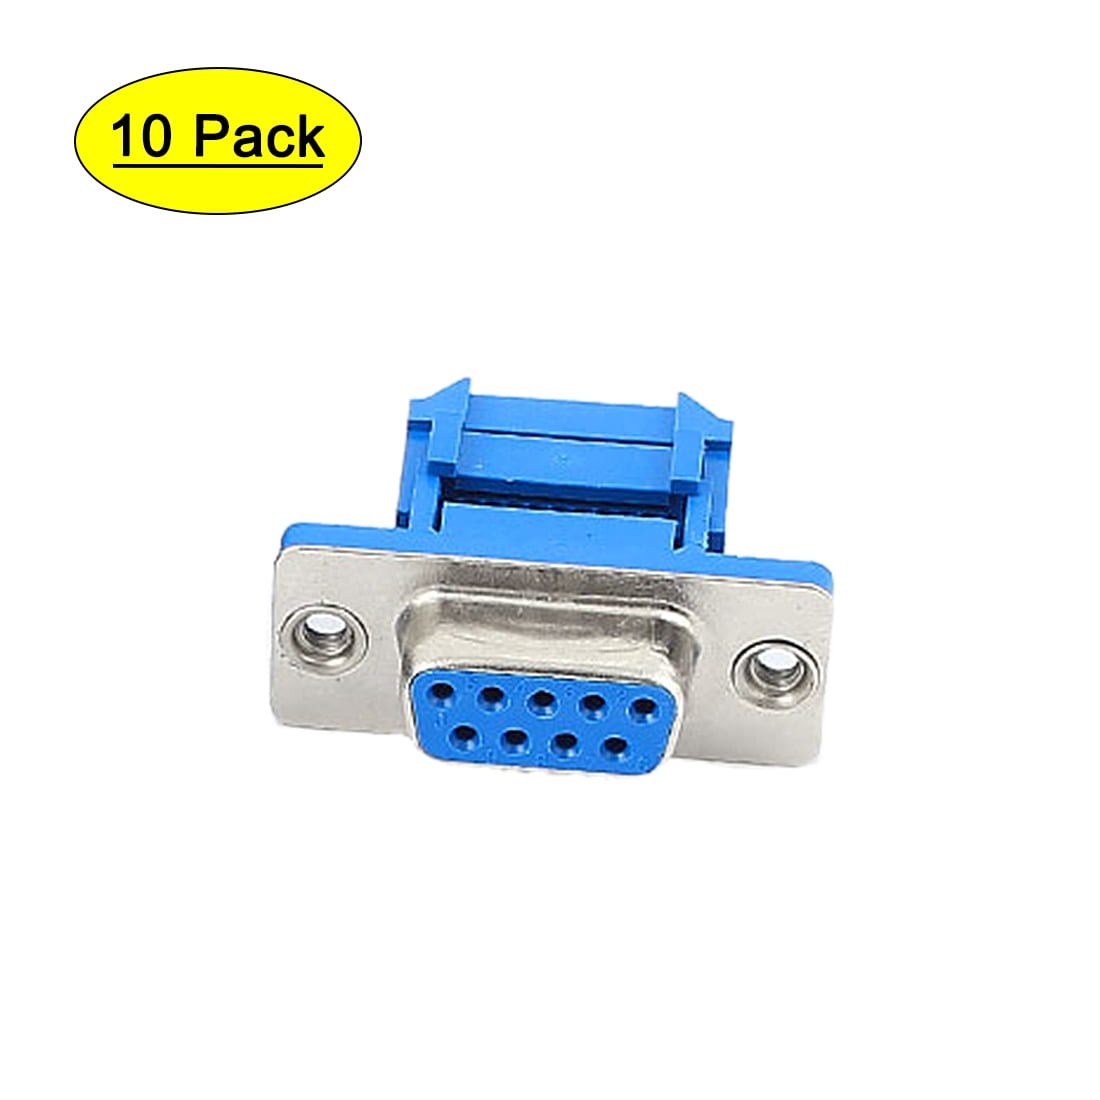 Female IDC 2.54mm Pitch Connectors for Flat Ribbon Cable 2x25 10-Pack 50-Pin 